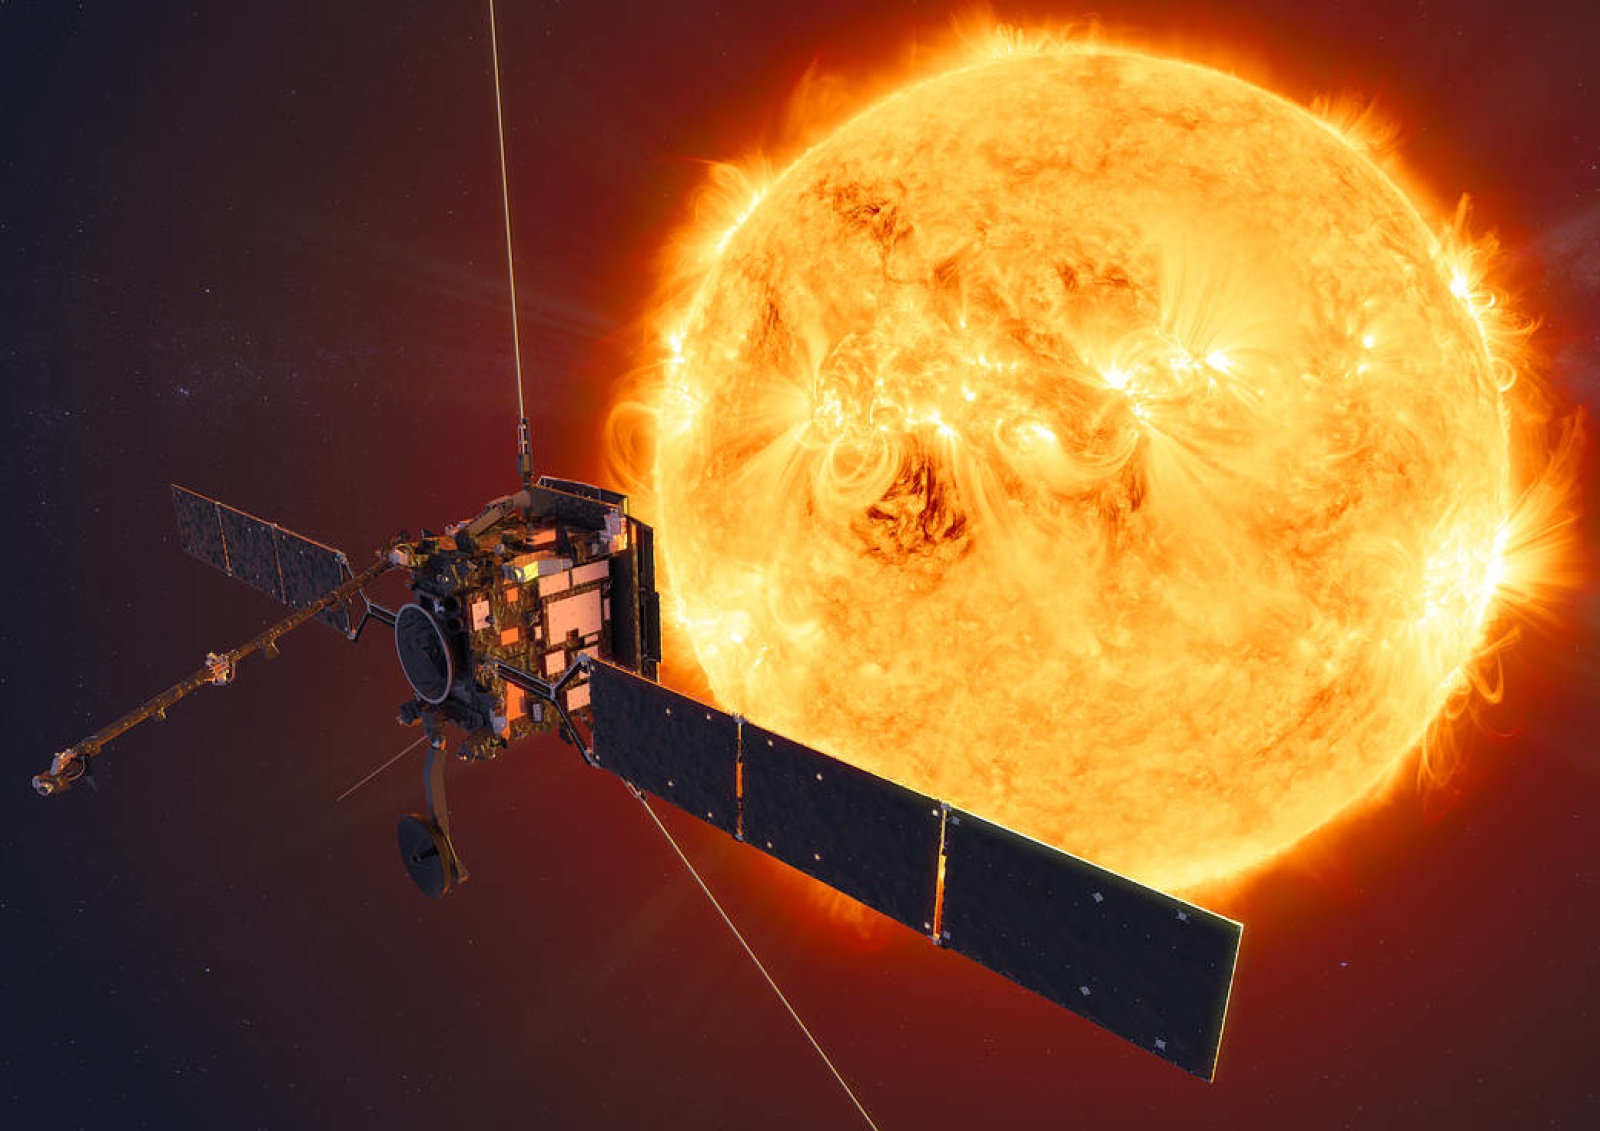 NASA's Solar Orbiter is on its way to observe the Sun's poles | DeviceDaily.com